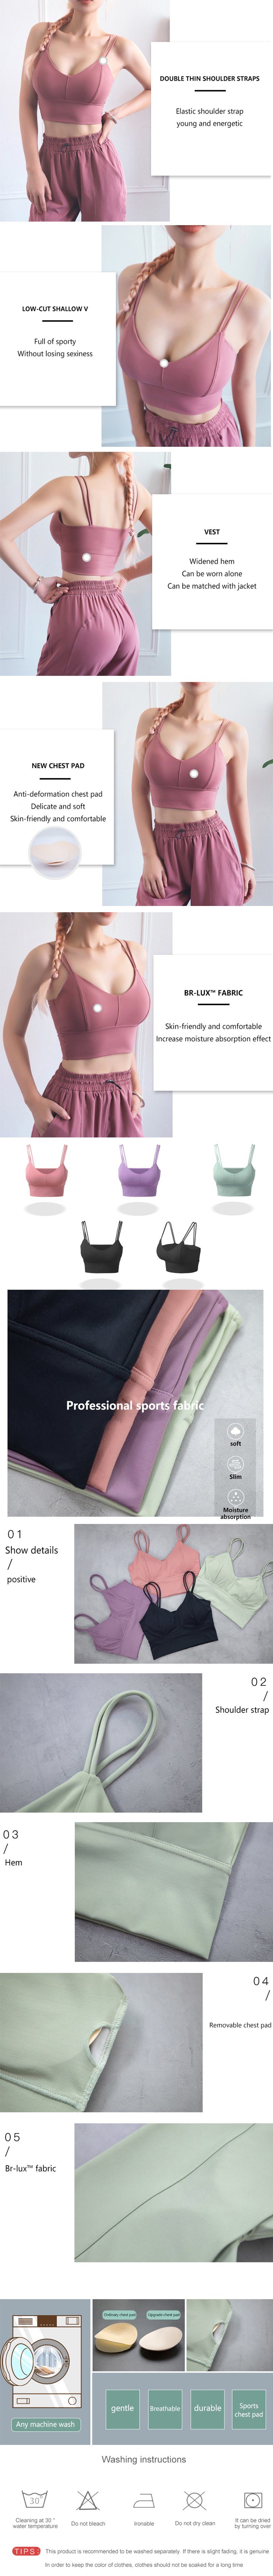 Yoga Gym High Impact Support Top Fitness Padded Seamless Sports Bra Women